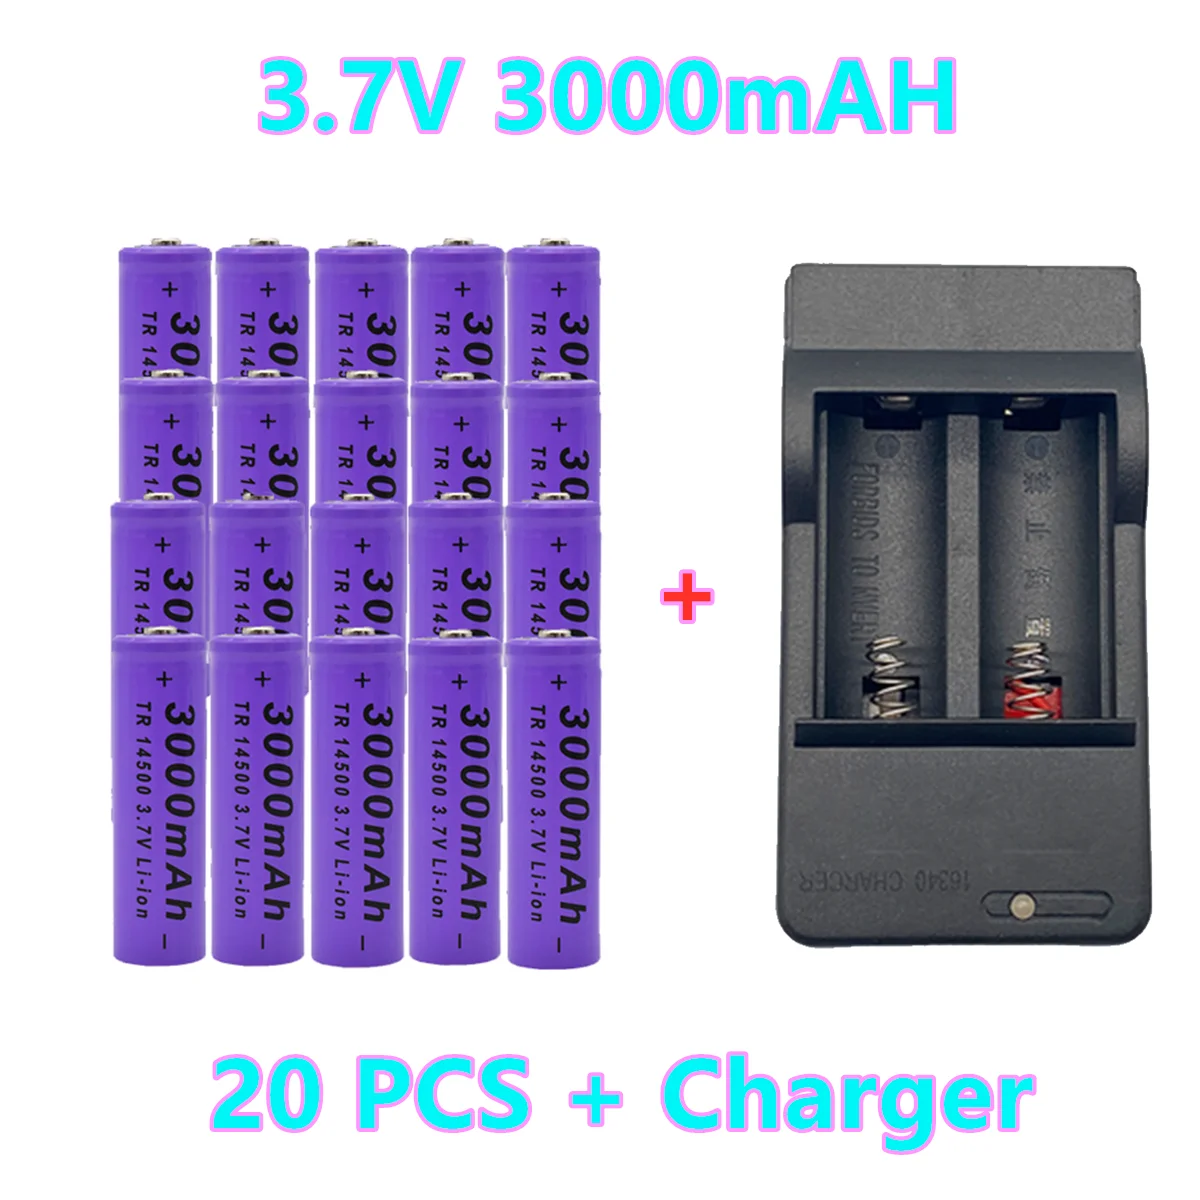 

2-20Pcs 14500 3000mAh 3.7V Li-ion Rechargeable Batteries Battery Lithium Cell for Led Flashlight Headlamps Torch Mouse+Charger